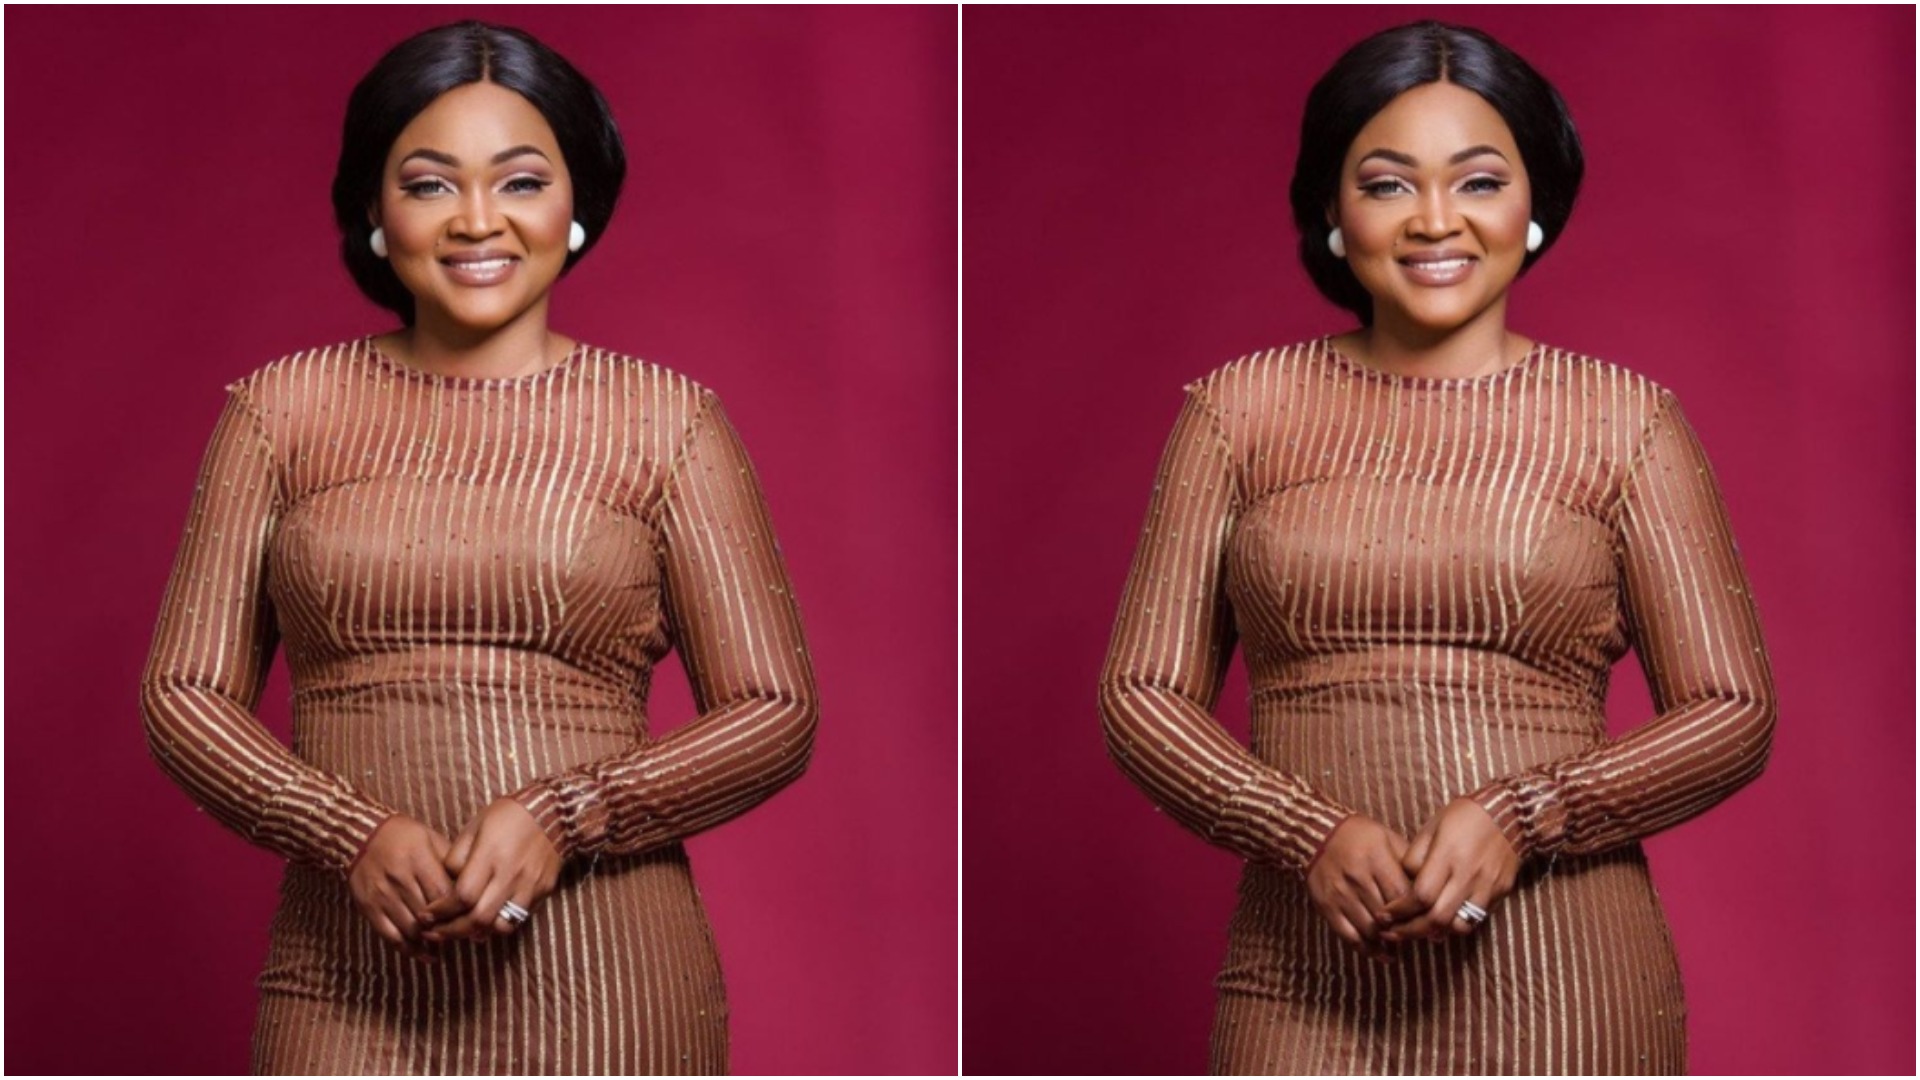 You can't beat this classy look by Mercy Aigbe (Photo)